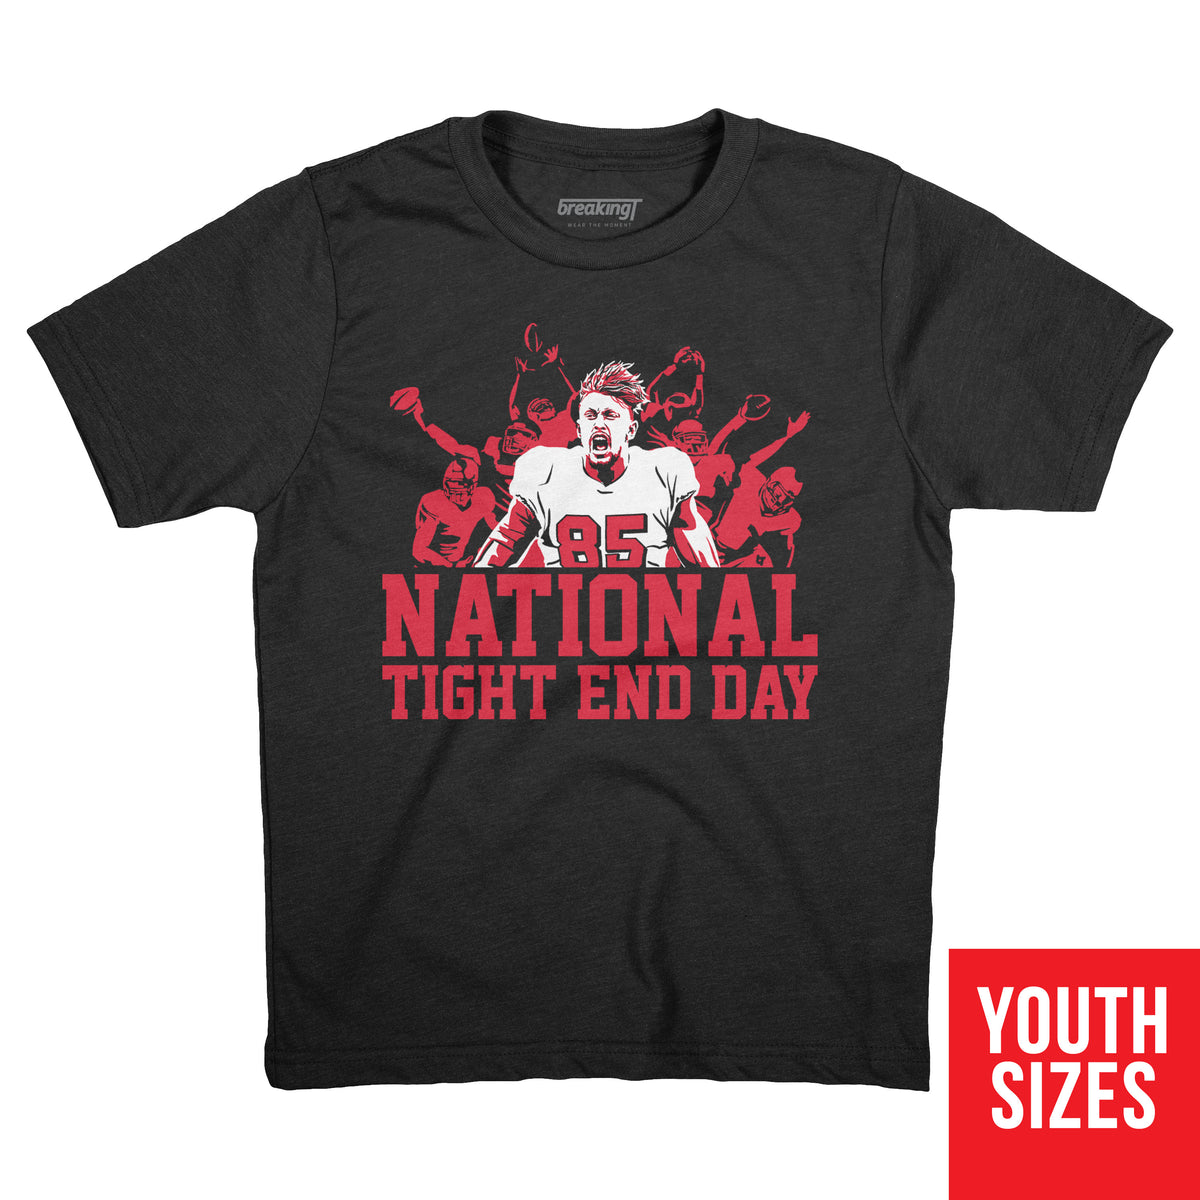 George Kittle Apparel, Officially Licensed National TE Day - BreakingT